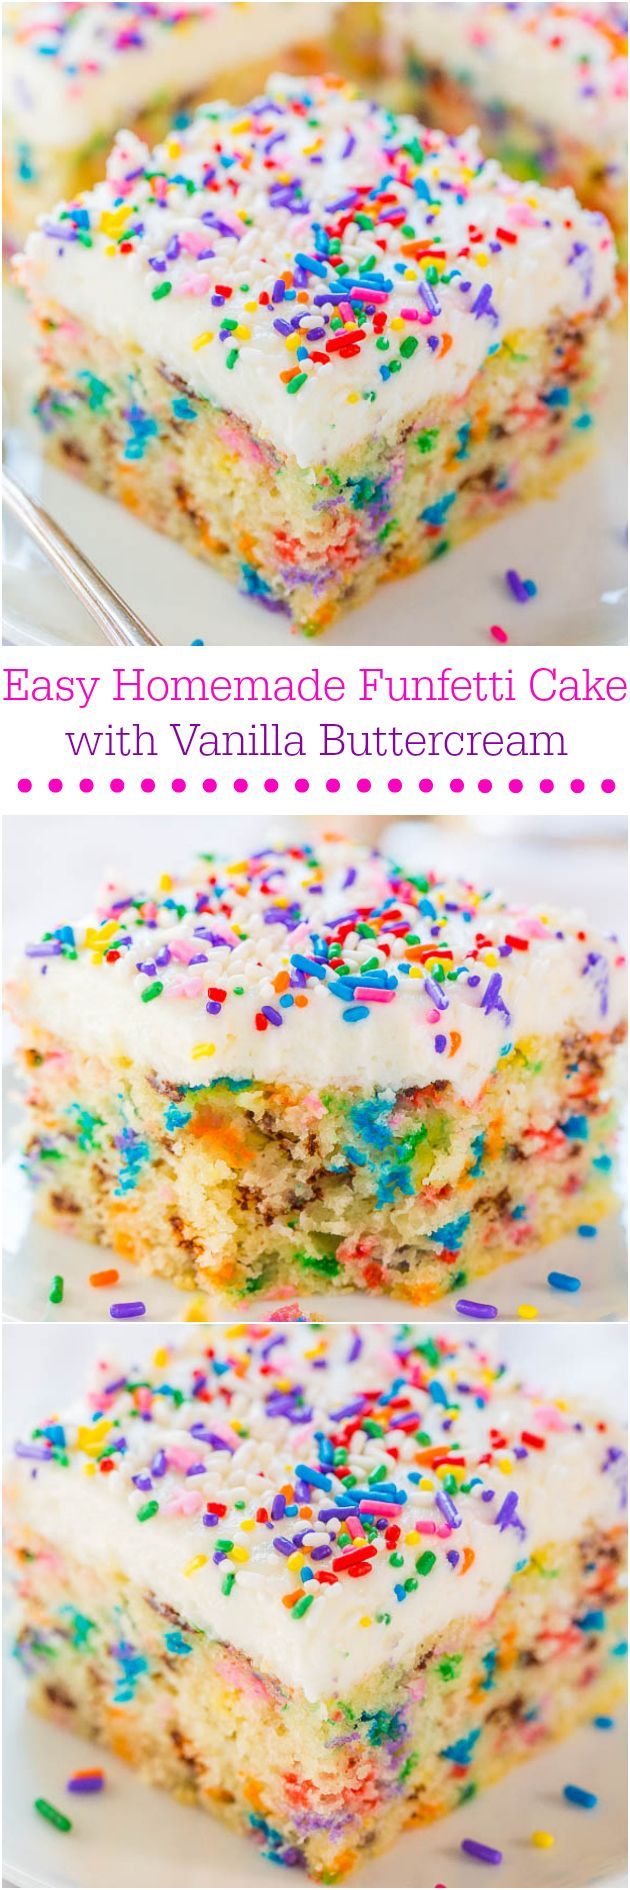 Easy Homemade Funfetti Cake –  Move over storebought cake mix!! This easy cake only takes minutes to make and tastes wayyyy